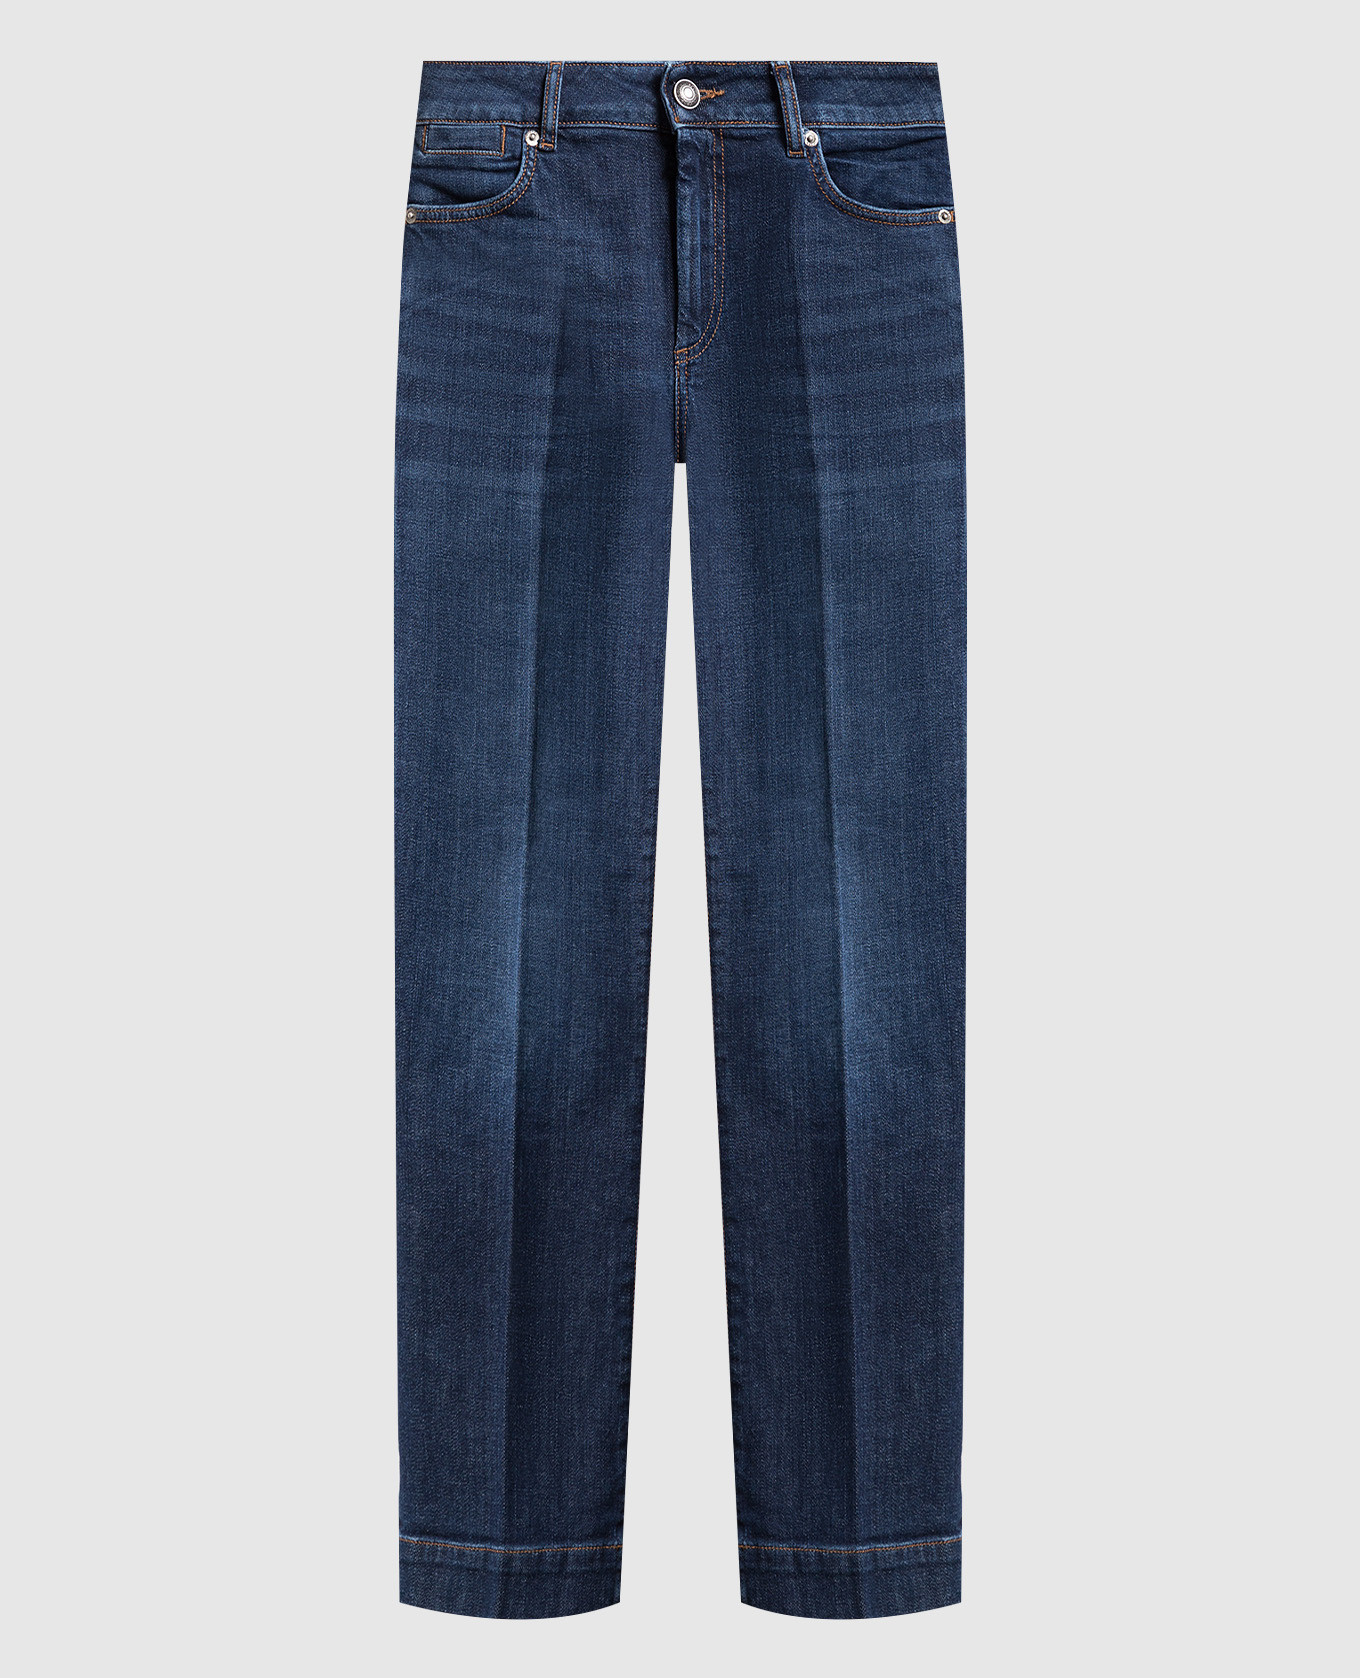 MESSICO blue jeans with a distressed effect